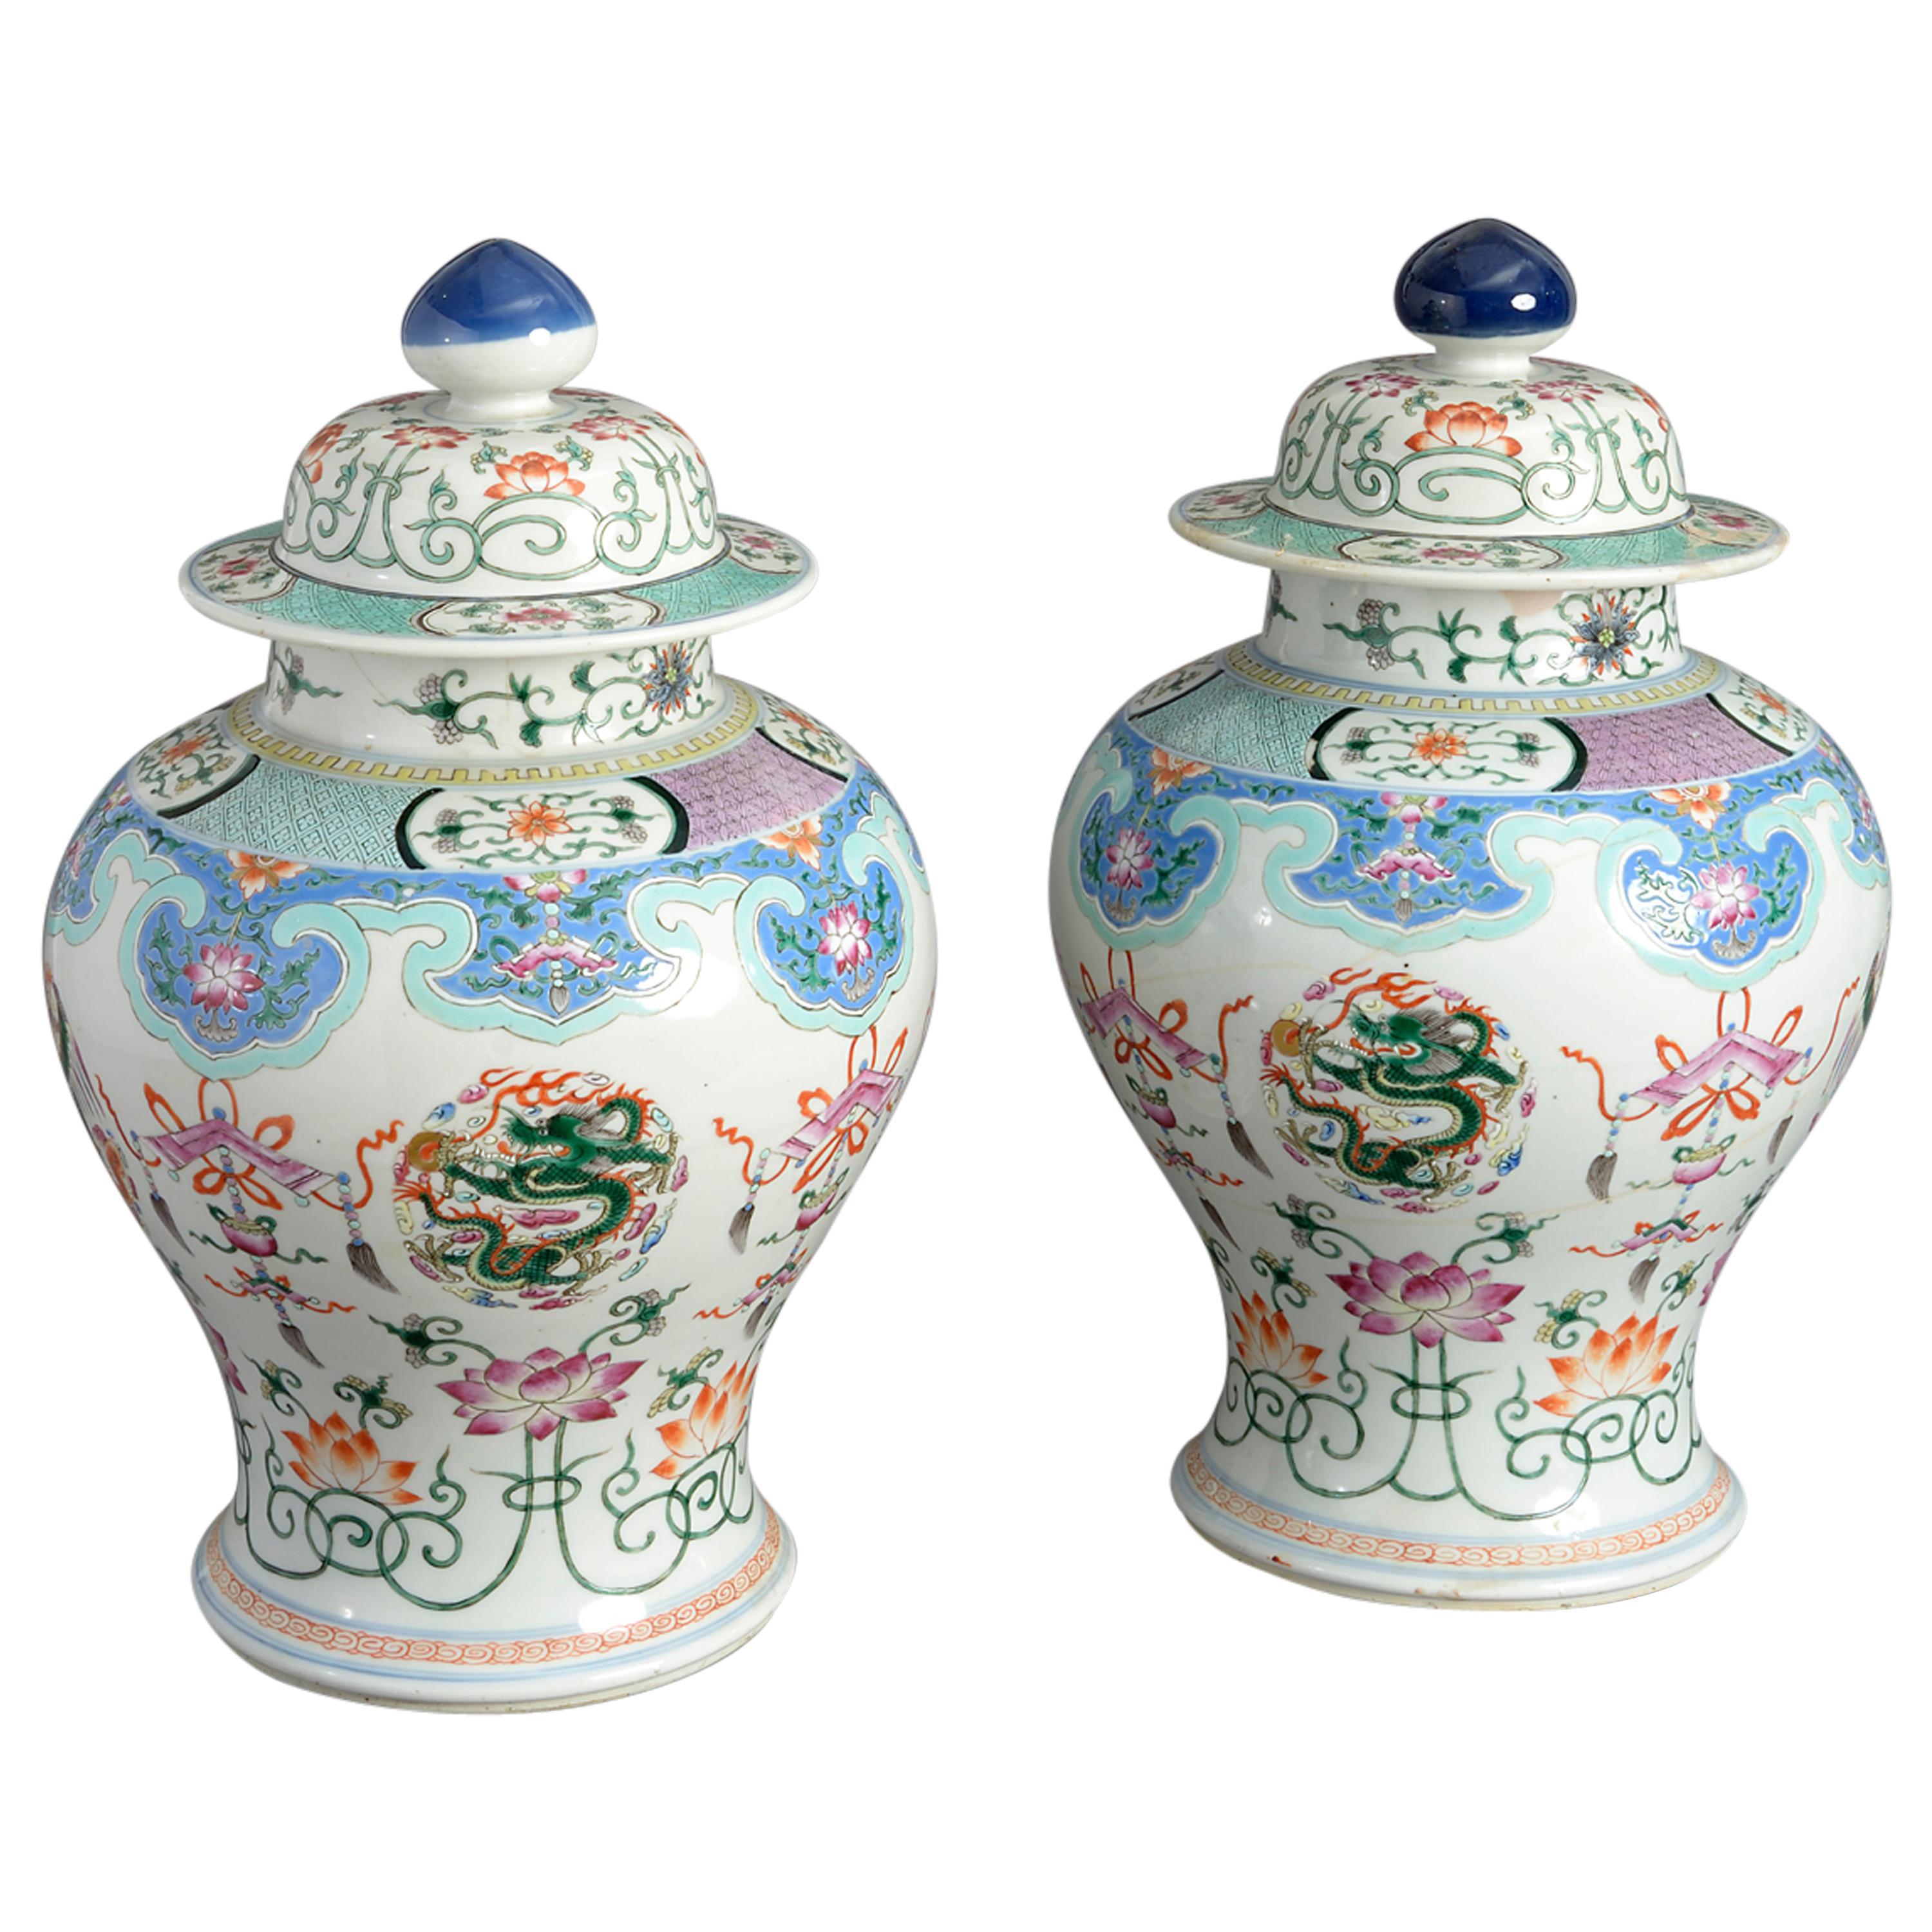 Pair of 19th Century Famille Rose Porcelain Vases and Covers